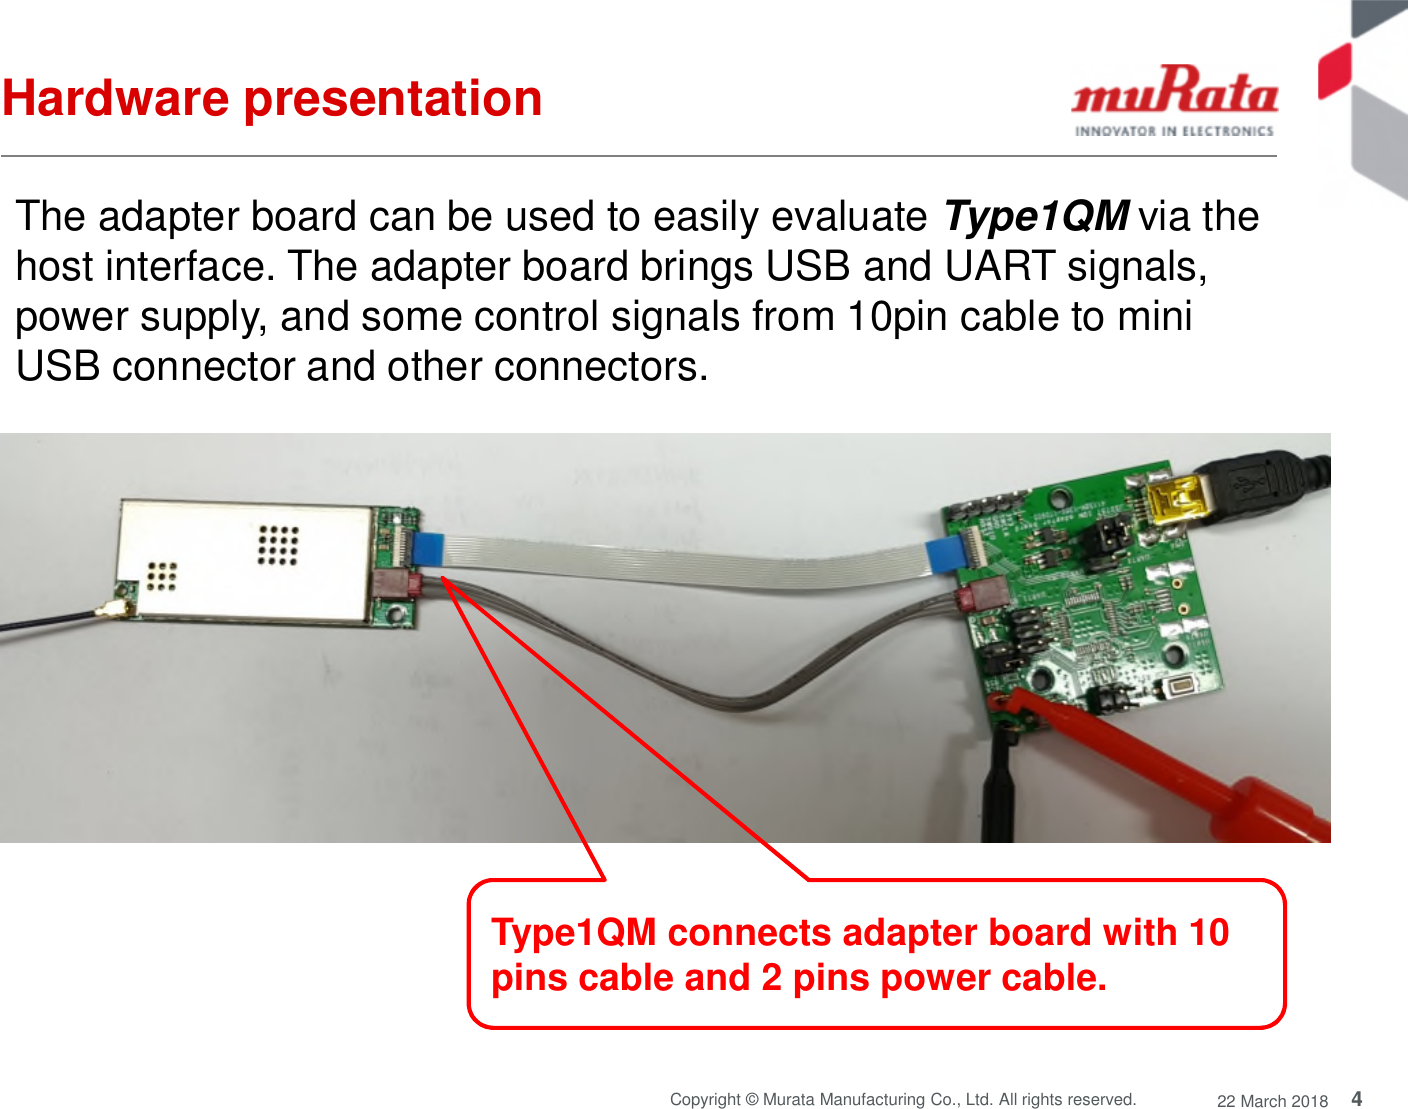 4Copyright © Murata Manufacturing Co., Ltd. All rights reserved. 22 March 2018Hardware presentationThe adapter board can be used to easily evaluate Type1QM via thehost interface. The adapter board brings USB and UART signals,power supply, and some control signals from 10pin cable to miniUSB connector and other connectors.Type1QM connects adapter board with 10pins cable and 2 pins power cable.